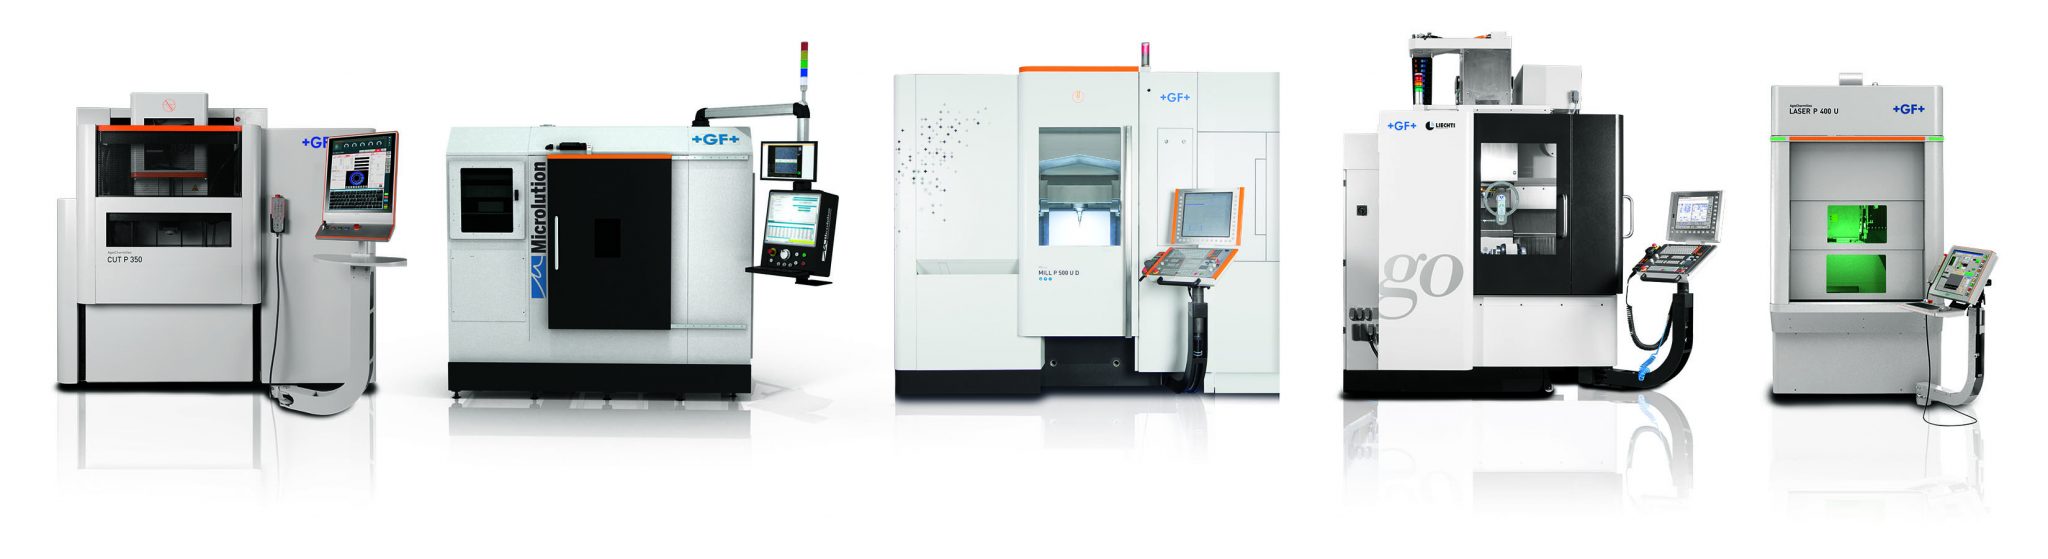 Envision the Future with GF Machining Solutions at IMTS